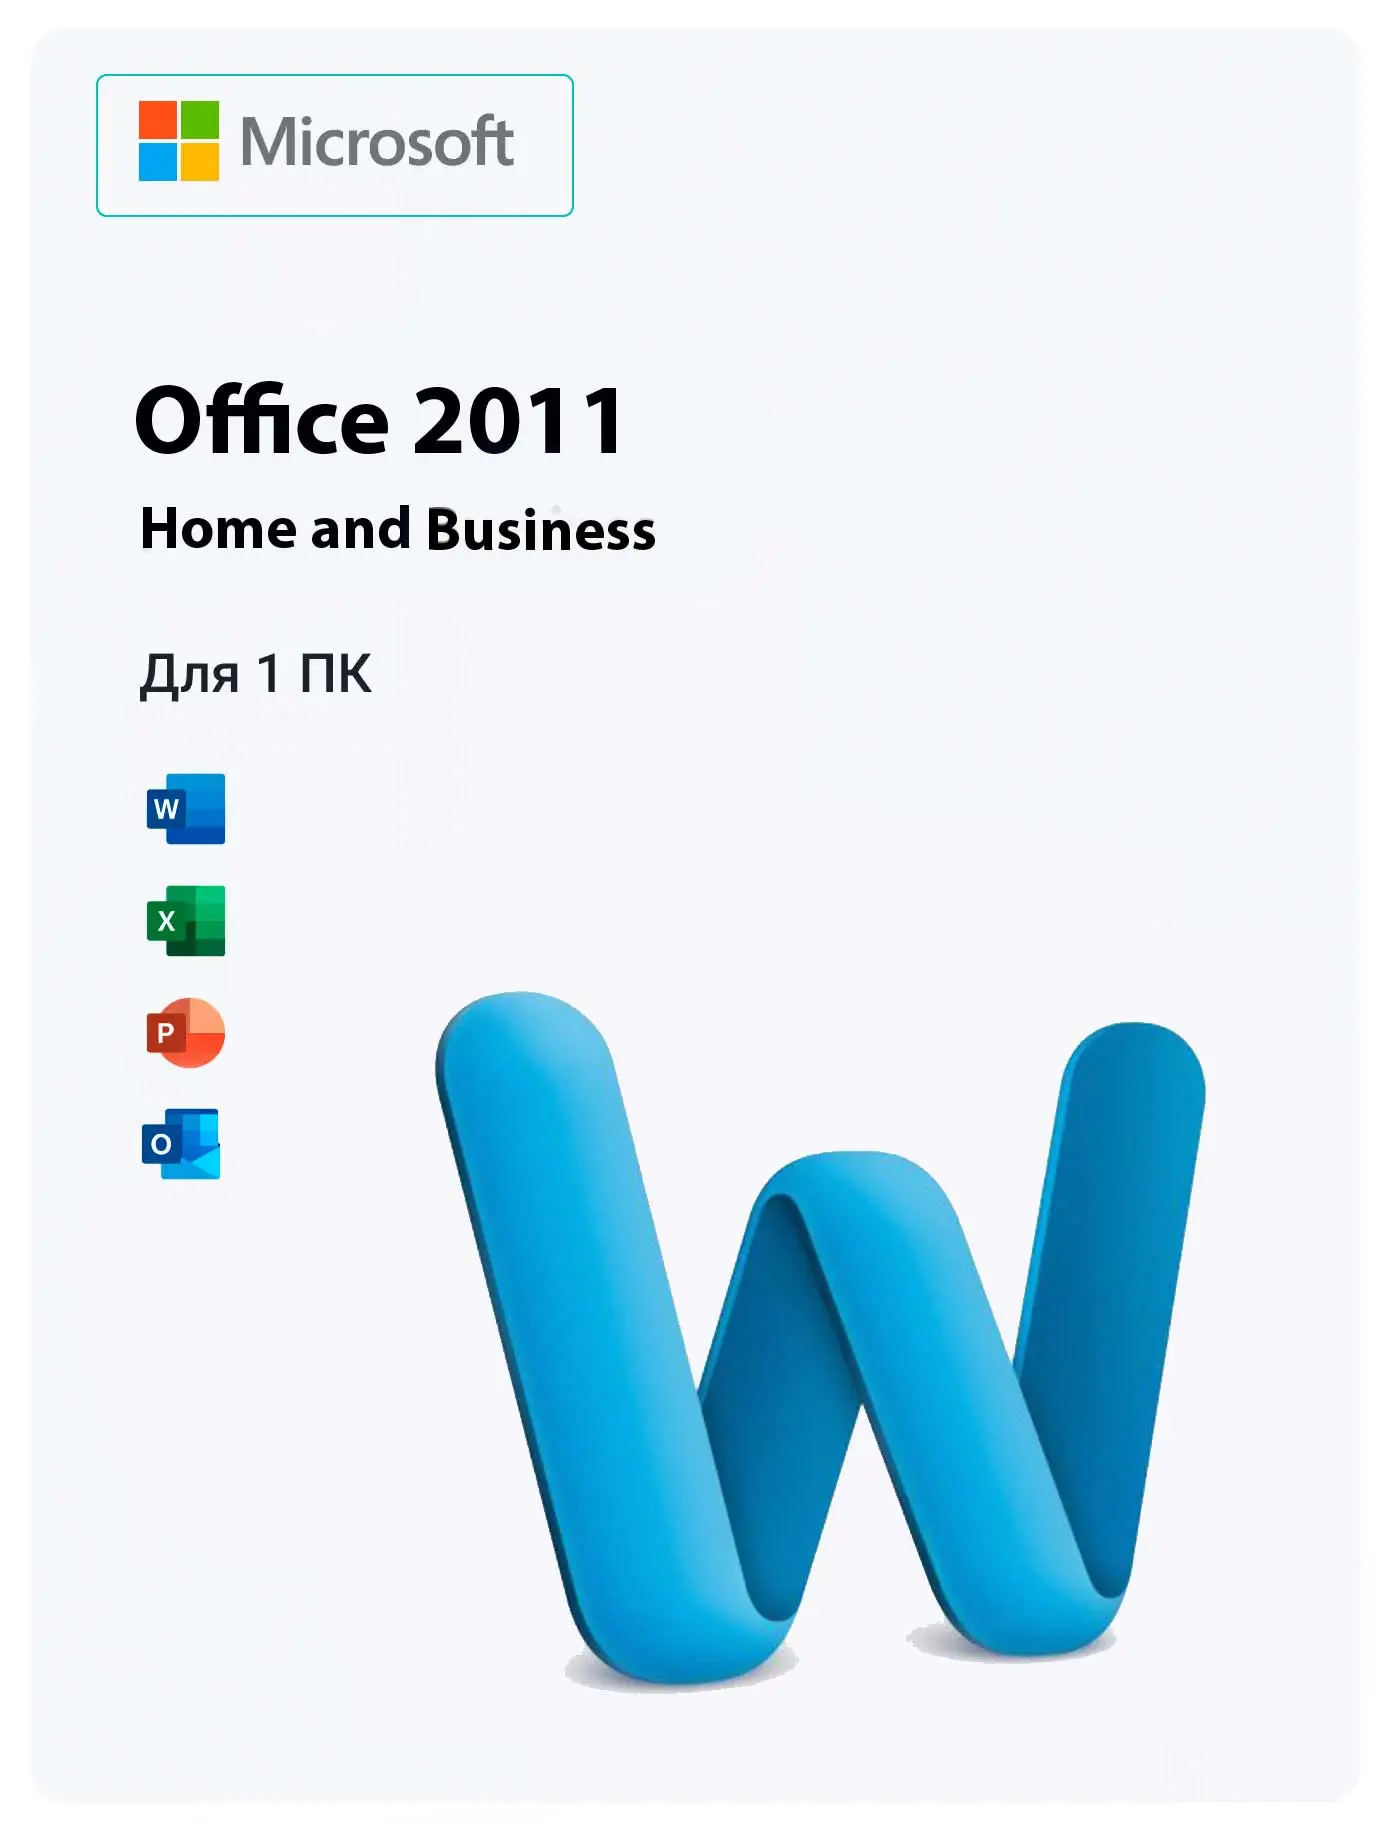 Microsoft Office 2011 Home and Business